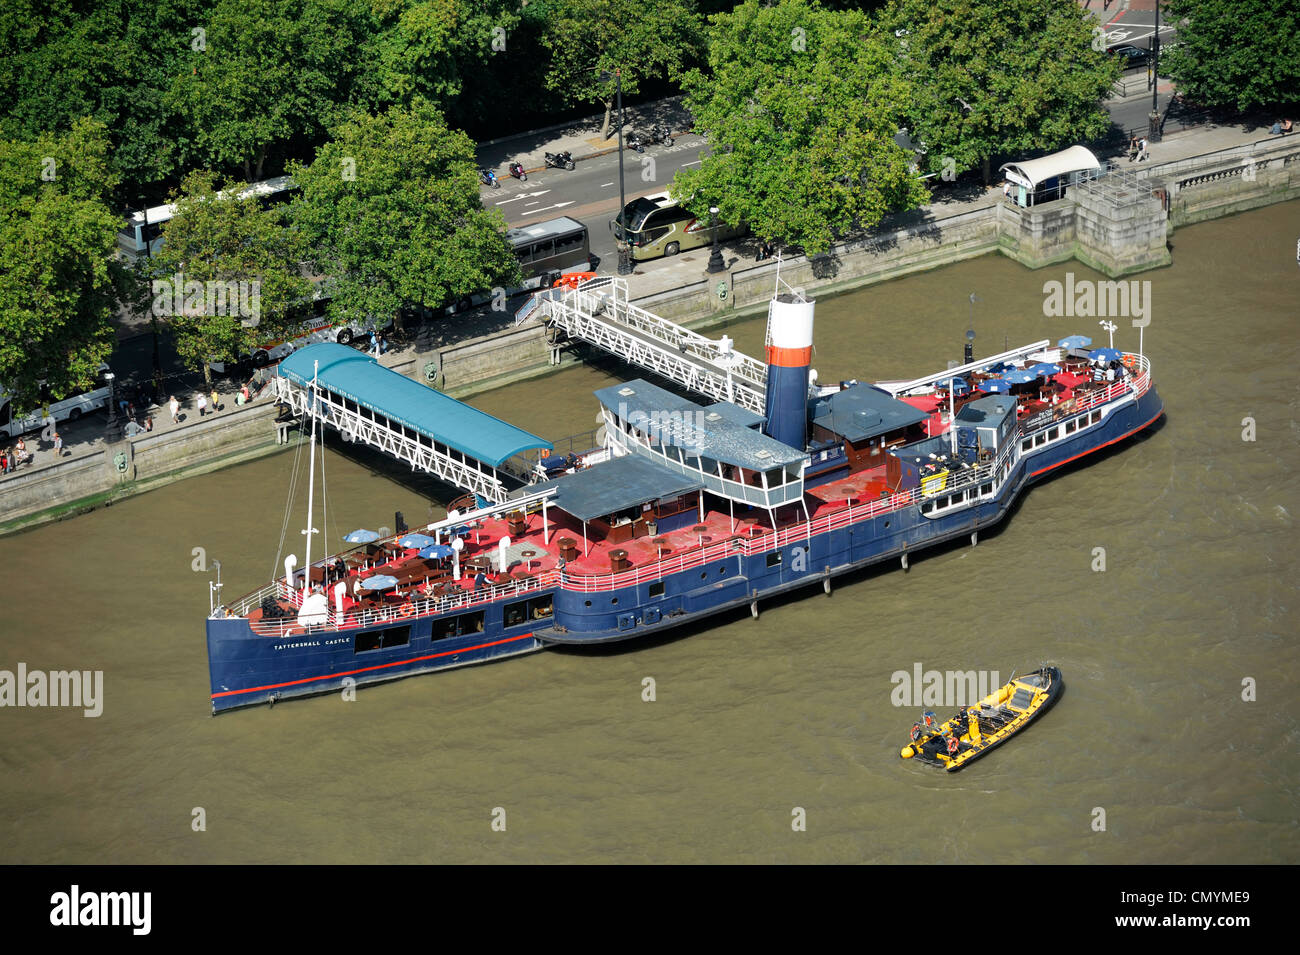 United Kingdom, London, Thames, PS Tattershall Castle boat converted into a Floating Pub and Restaurant Stock Photo